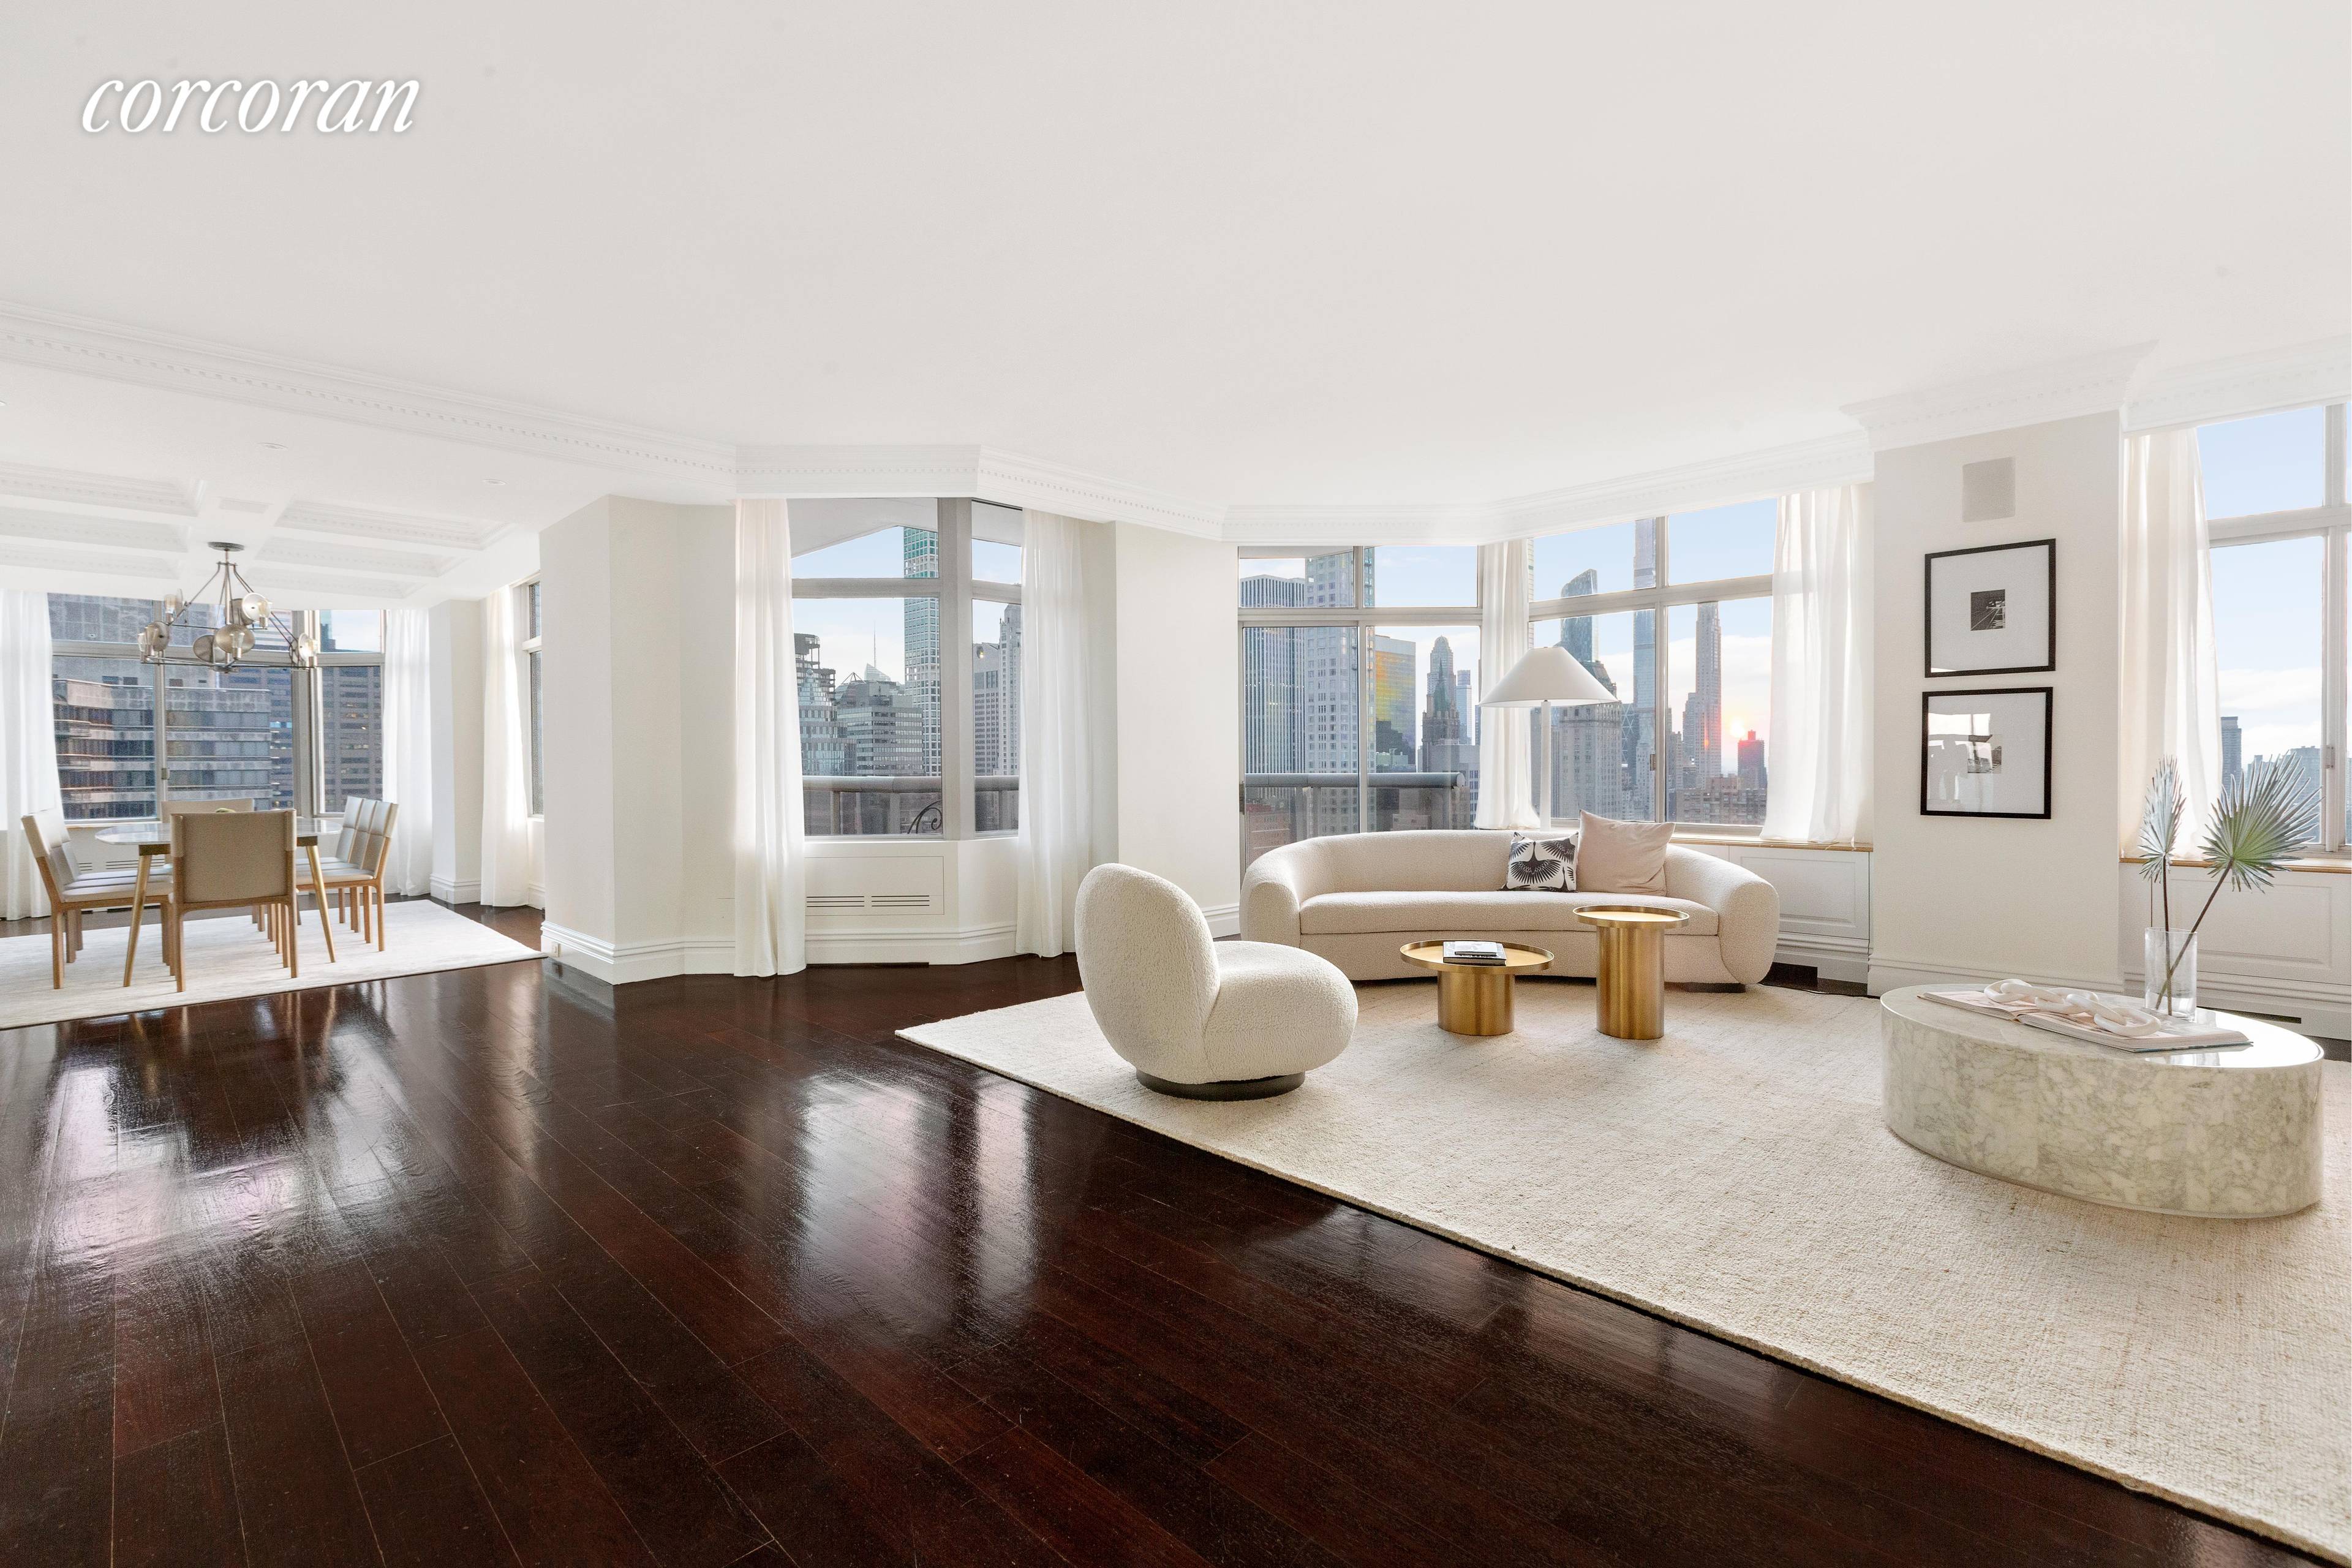 This exceptional, 5, 020 square foot duplex is perched on the 34th and 35th floors of The Royale Condominium, located at 64th and Third Avenue.